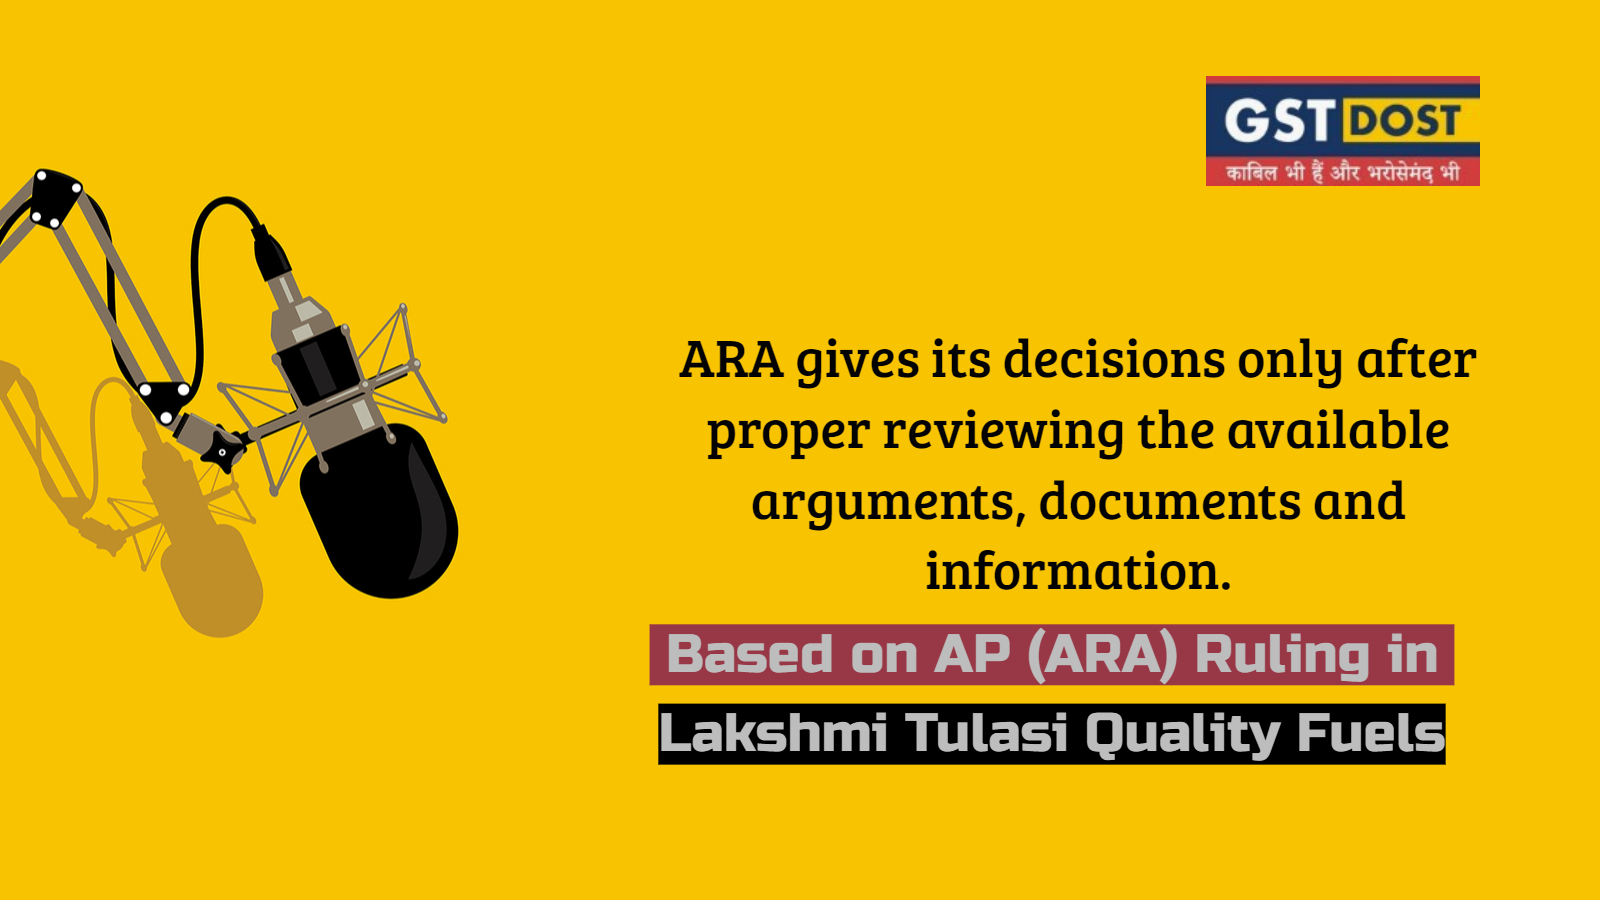 ARA gives its decisions only after proper reviewing the available arguments, documents and information.